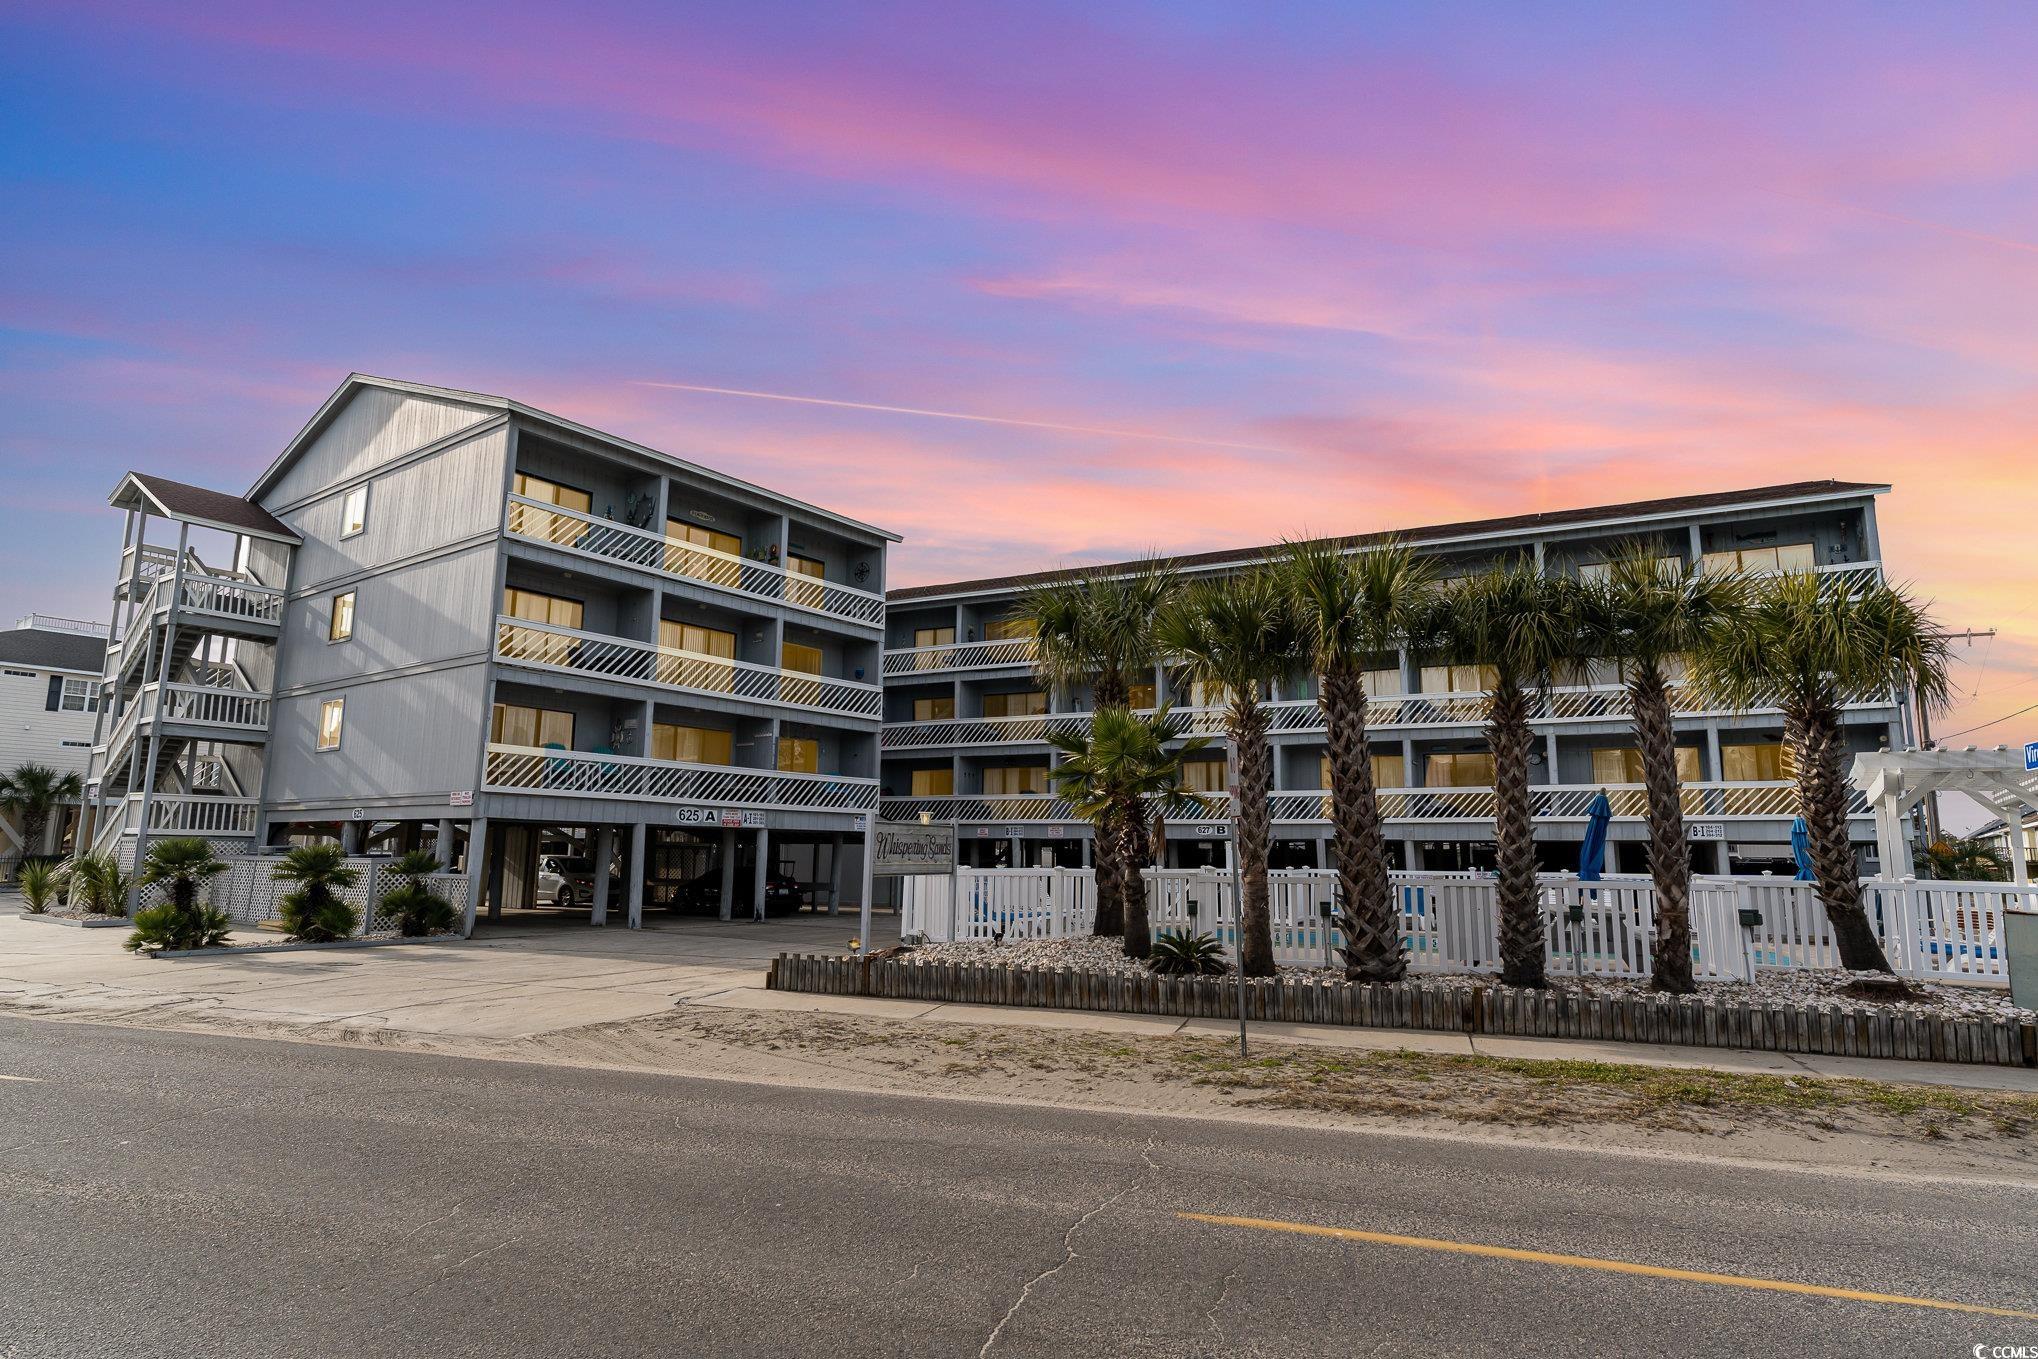 don't miss out on a great opportunity to own this move-in or rental-ready beach retreat! located across the road from the ocean, this turn-key, fully furnished condo in whispering sands was completely remodeled in 2023 to include a new hvac and water heater, popcorn ceiling removal, lvp flooring throughout, new flush mount lighting, fresh paint, and and all new furniture in the living room and secondary sleeping quarters. the kitchen has been updated with butcher block countertops and a new stove and microwave. the bathroom boasts a new shower, dual vanity with quartz counter and all new tile floors. whispering sands is located just a few blocks away from restaurants, entertainment, and the garden city pier, and the public beach access is just steps away. the low hoa dues cover grounds maintenance, building insurance and all utilities except electric, and the community offers a relaxing swimming pool, a grilling area, and a convenient coin laundromat. whether you're escaping the heat of summer lounging by the pool or wading in the ocean, strolling down the beach in the cooler months, or relaxing on your private balcony, you'll find the tranquil beach life invigorating and rejuvenating. stress-free beach living that's also budget-friendly! this would also make a great investment property, allowing both long and short-term rentals. the condo was used as a short-term rental for approximately 9 months in 2023 and rental data is available upon request. not all bedrooms are conforming; contact agent for full bedroom details.